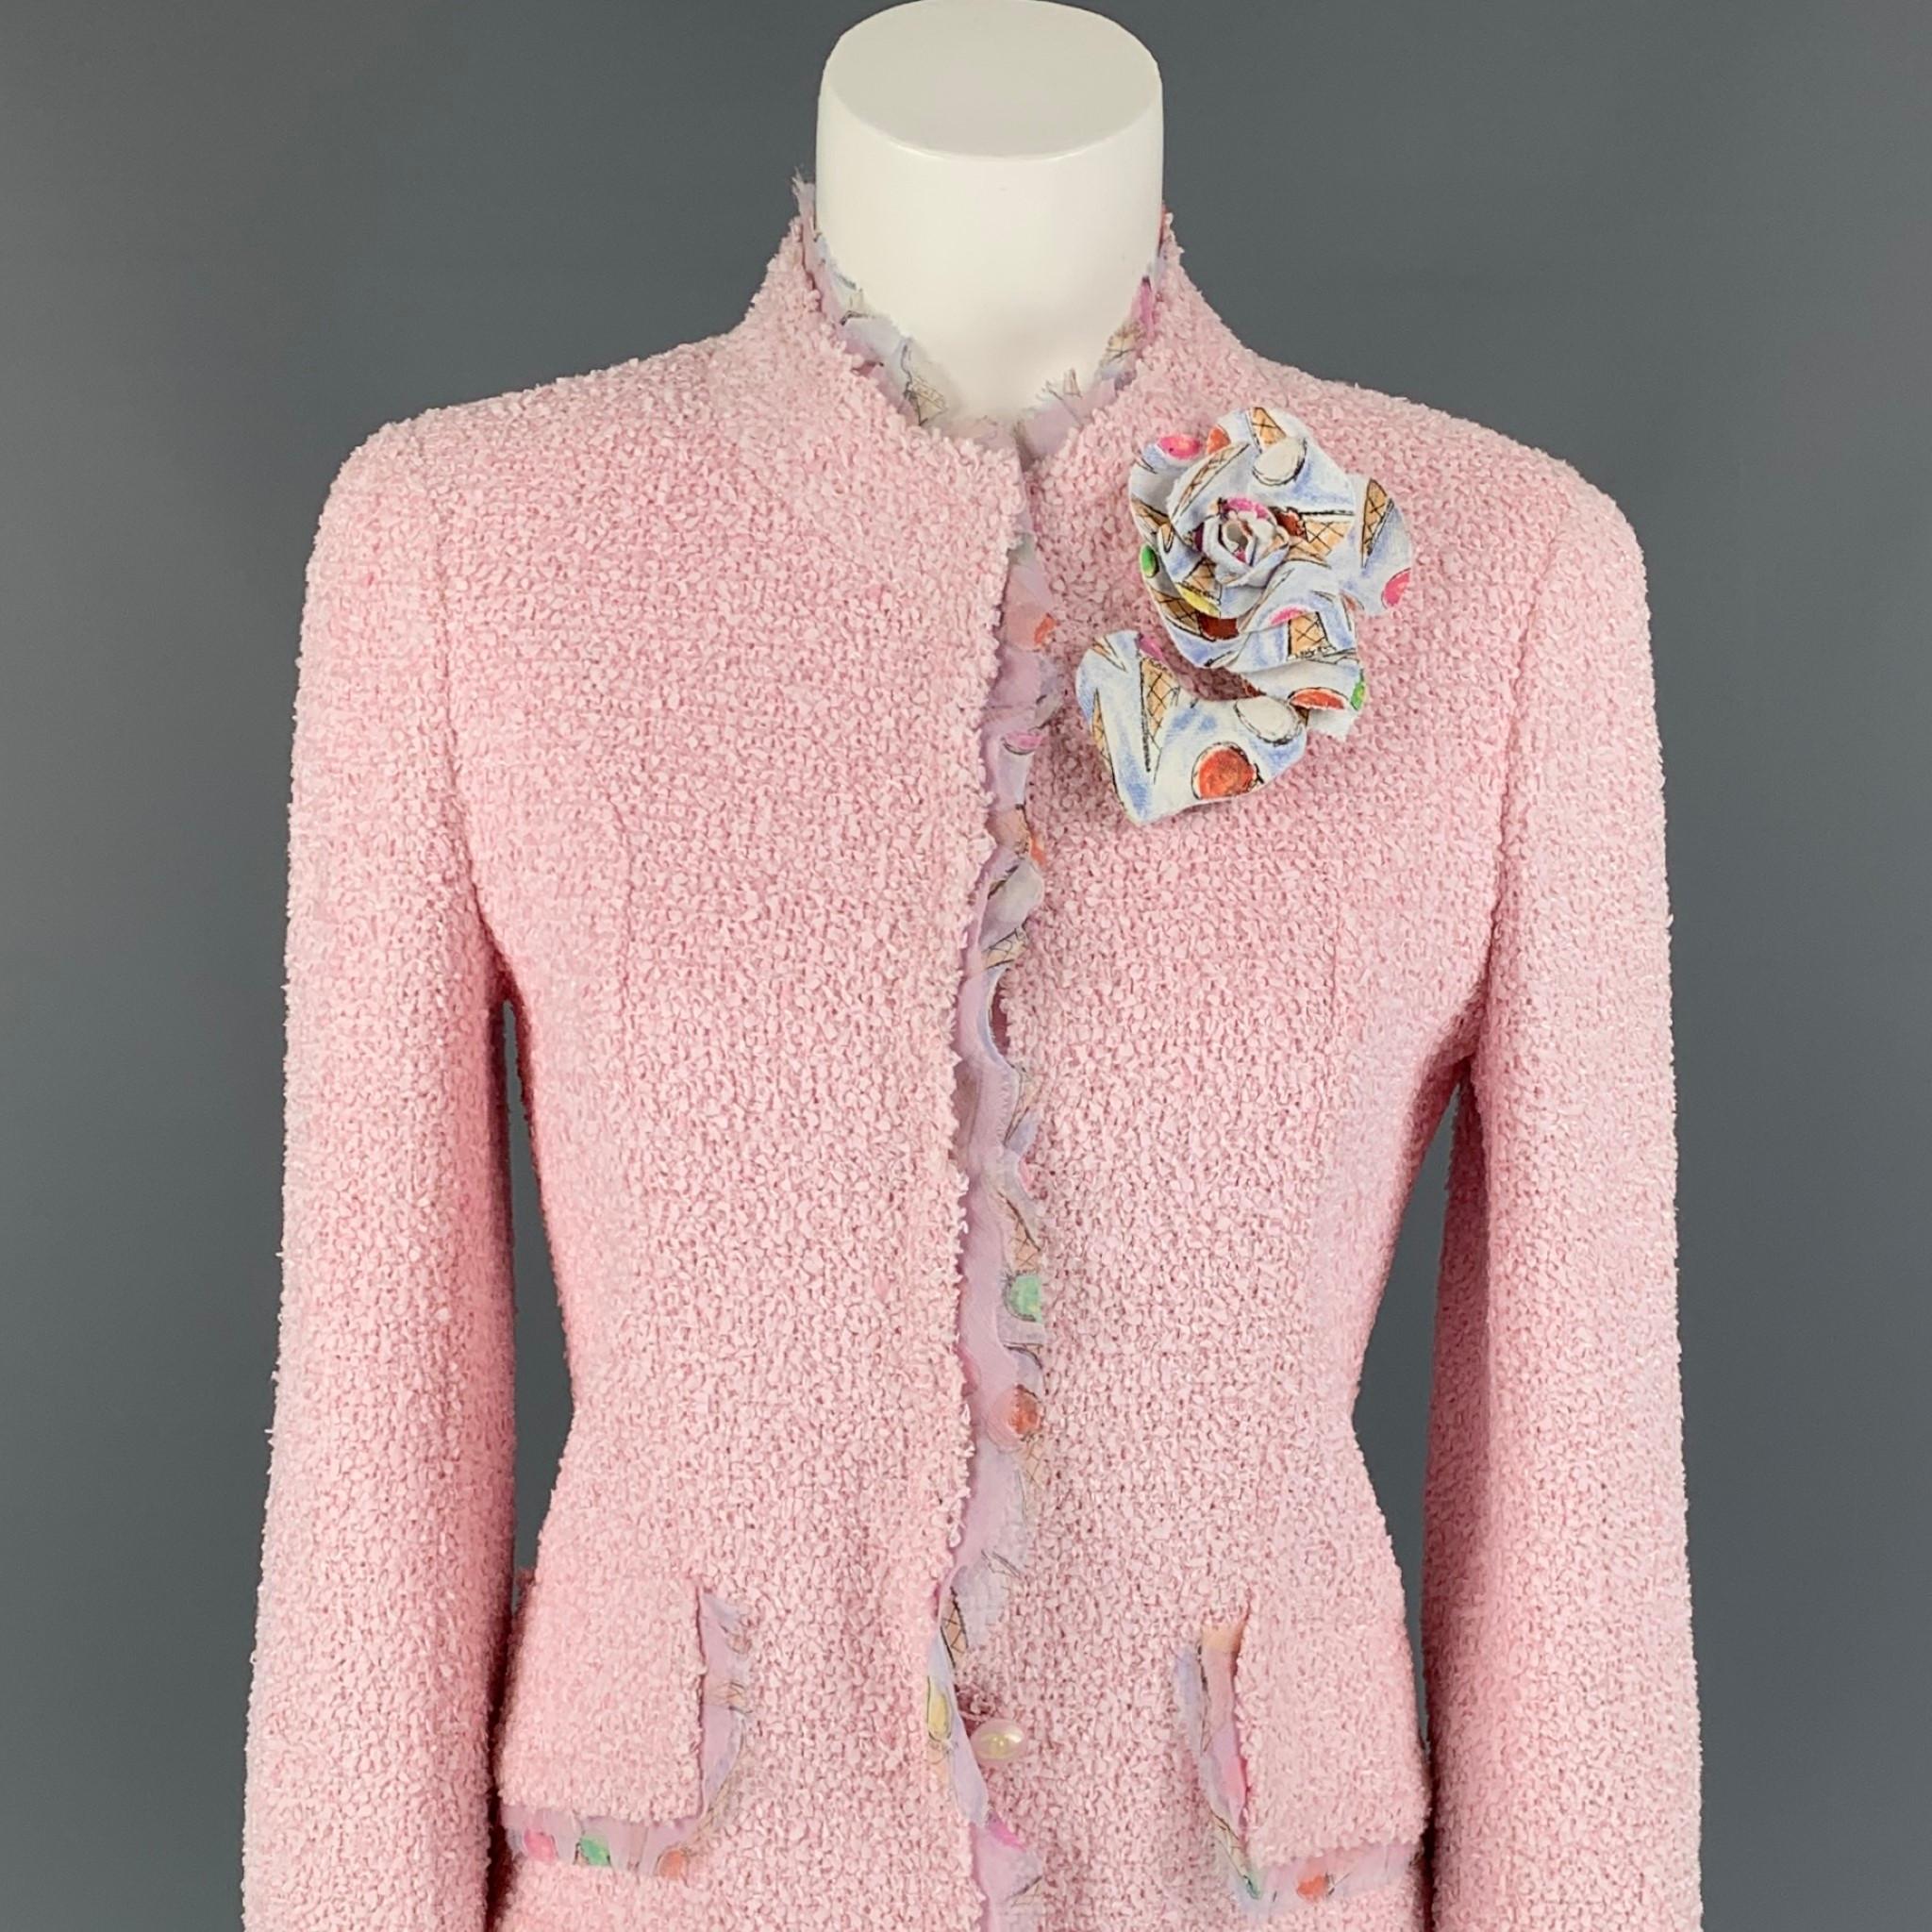 CHANEL 2004 jacket comes in a pink boucle polyamide blend with a full print liner featuring a heart & floral pin, logo buttons, silk ice cream trim, flap pockets, and a buttoned closure. Made in France. 

Excellent Pre-Owned Condition.
Marked: